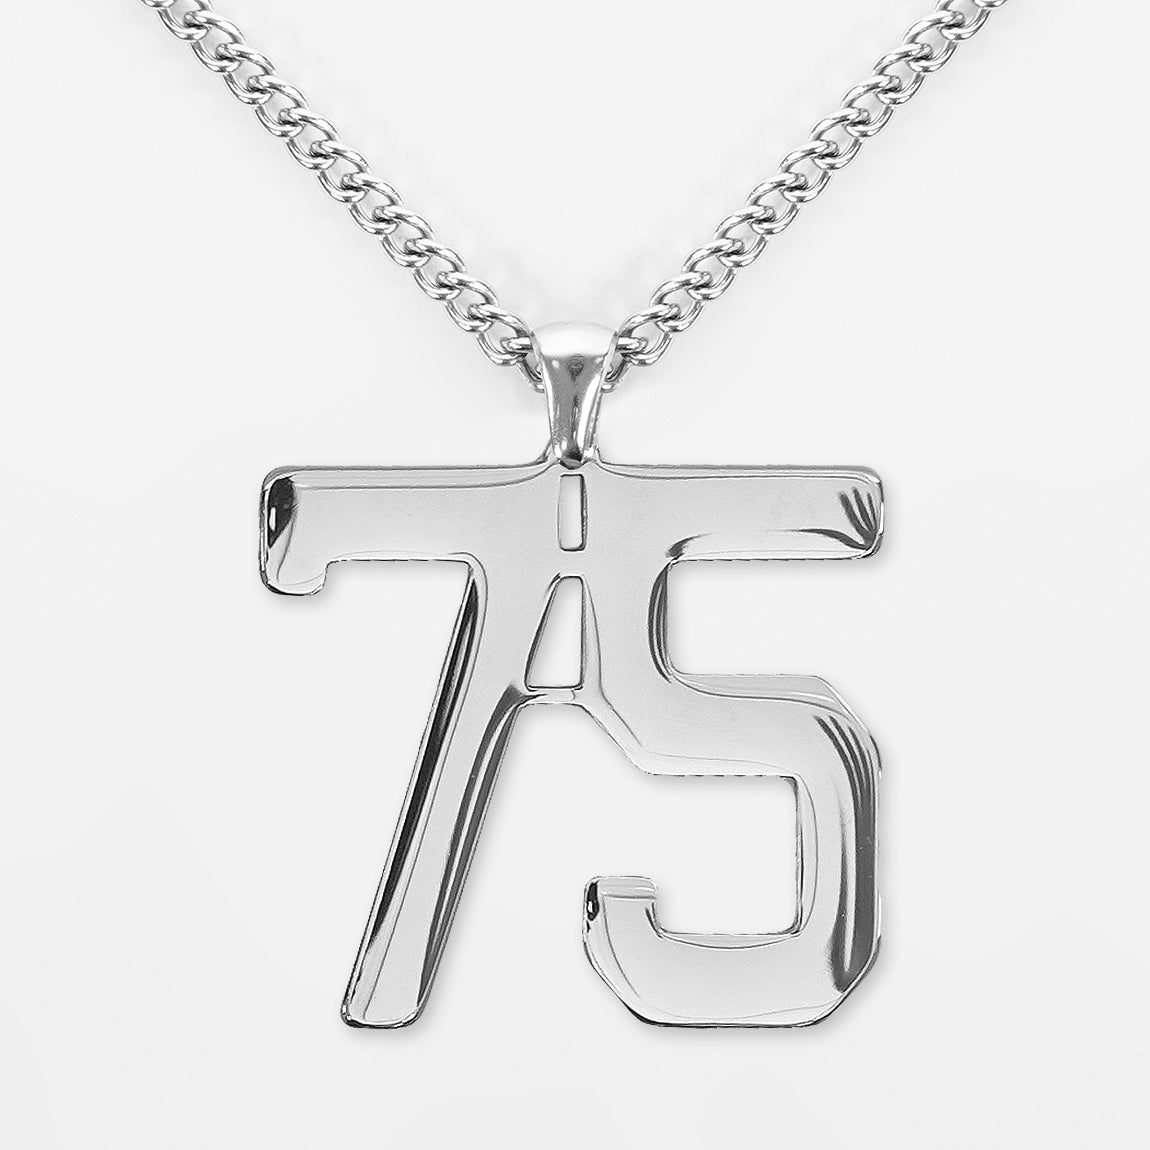 75 Number Pendant with Chain Necklace - Stainless Steel